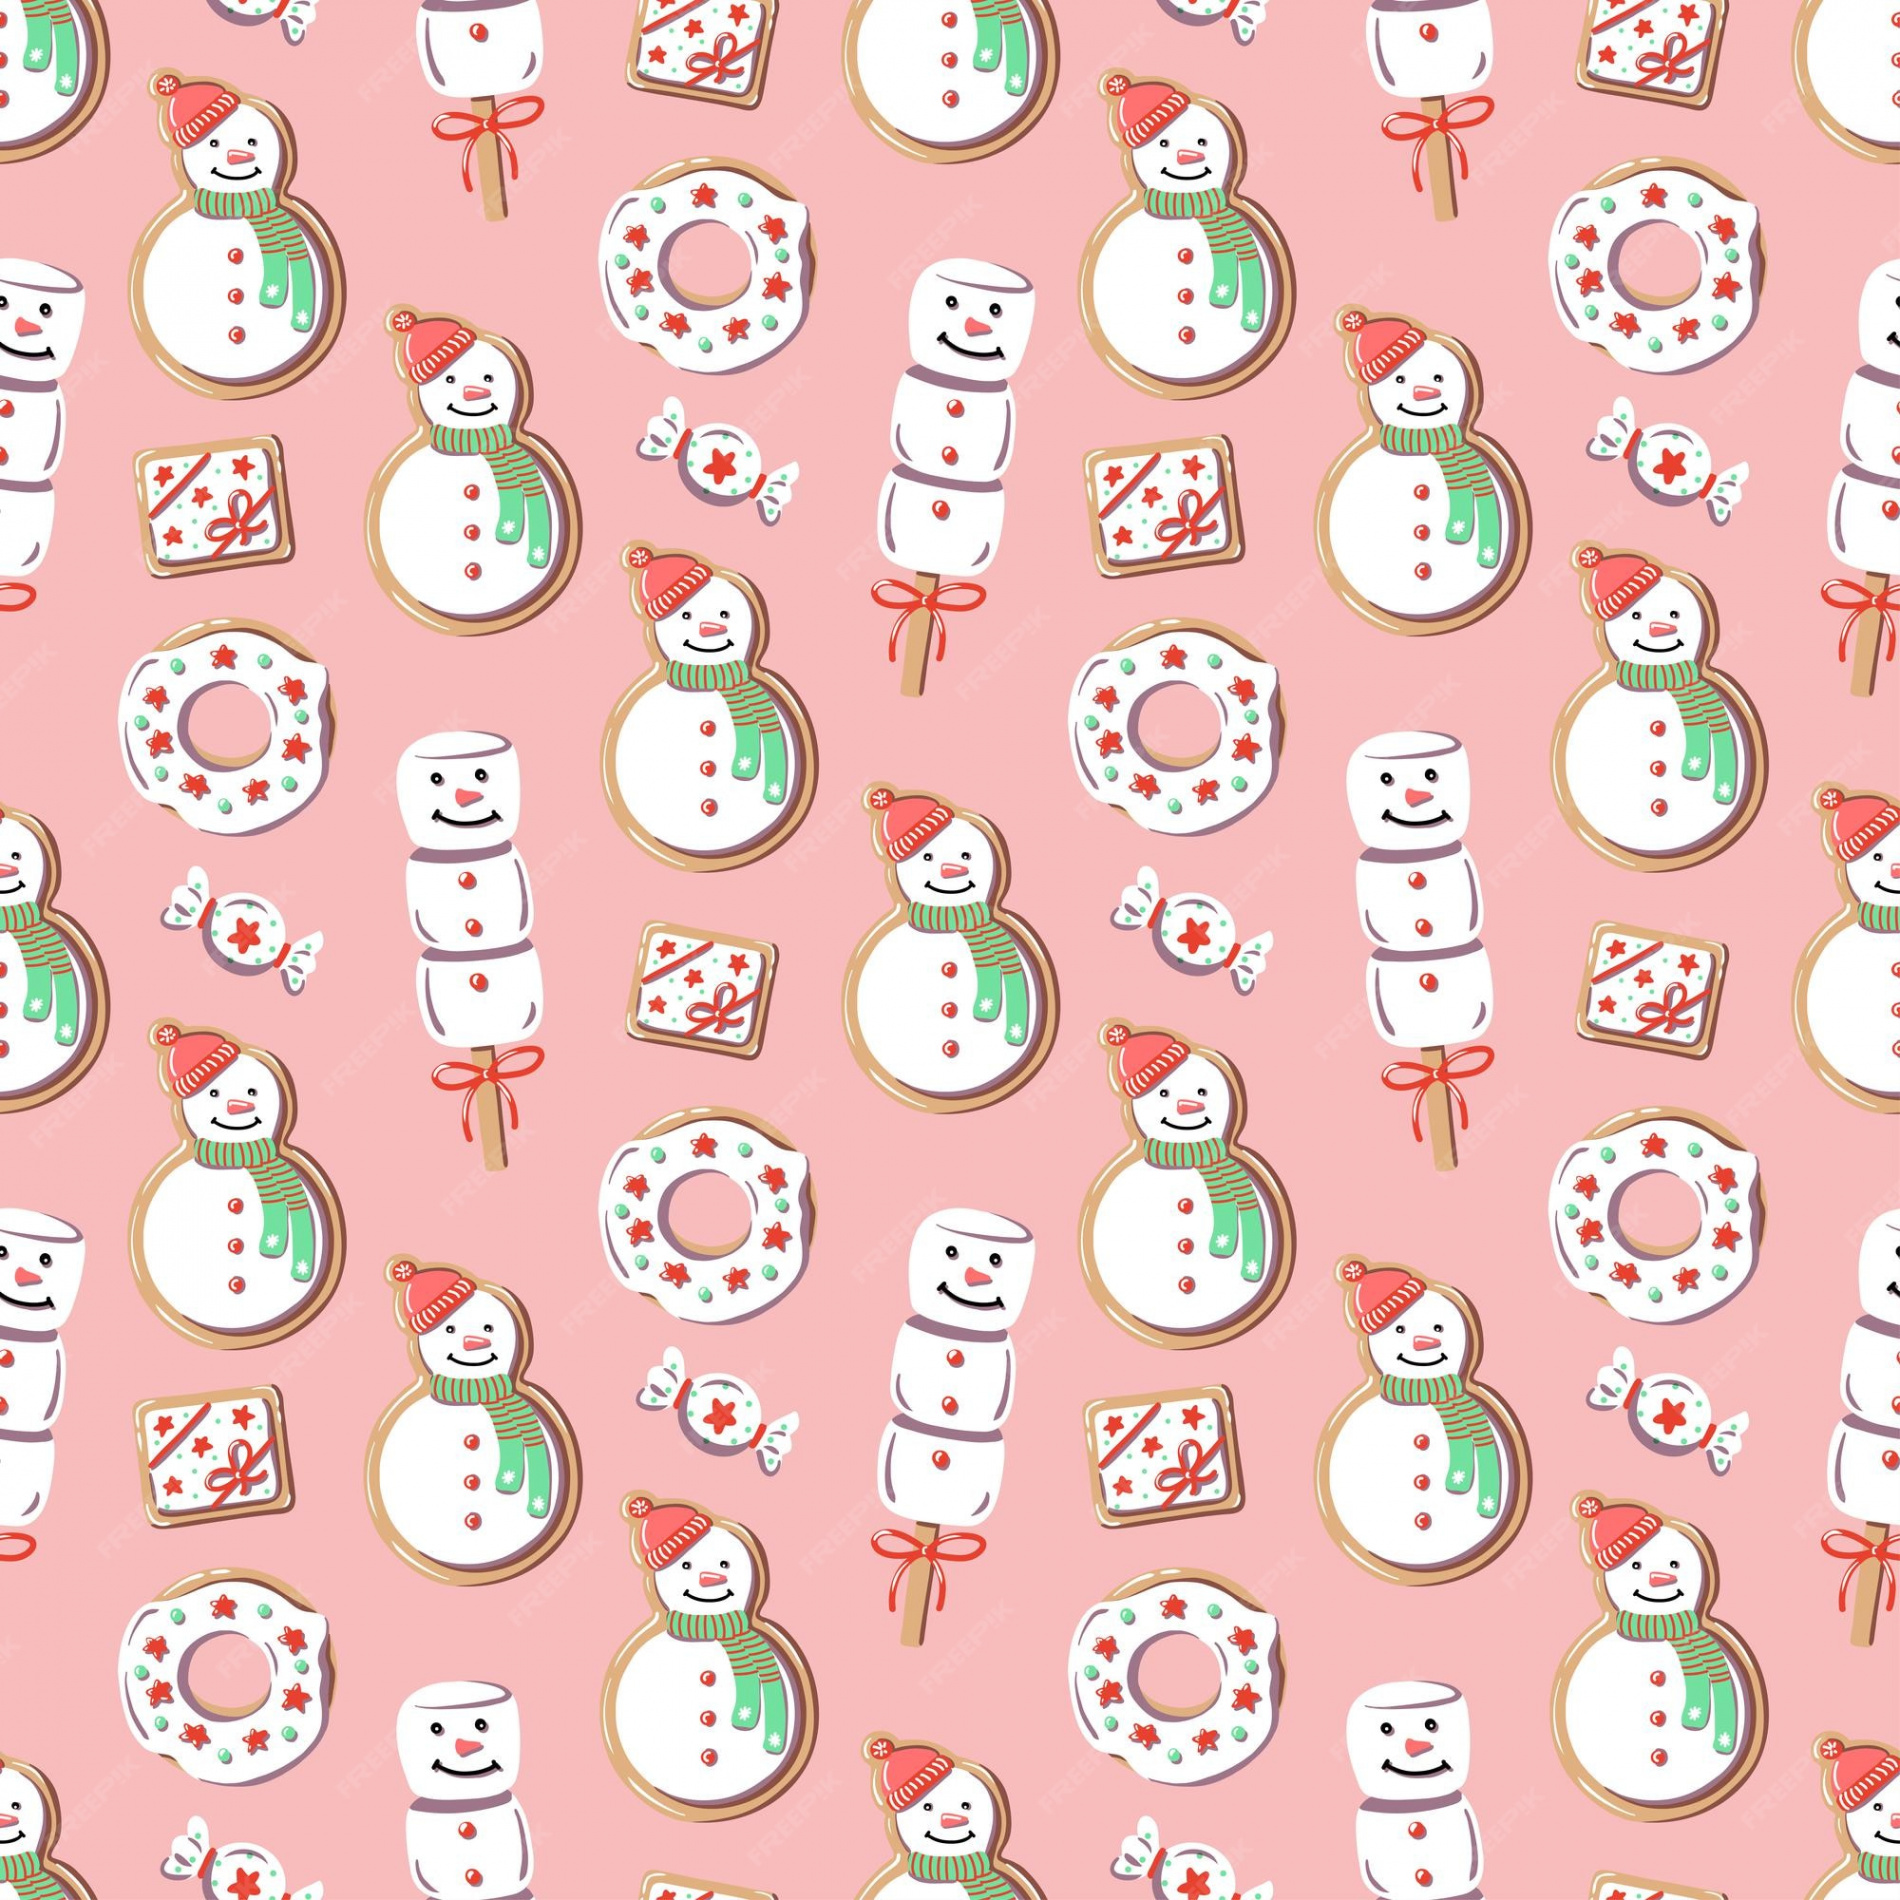 Premium Vector  Christmas pattern with snowman